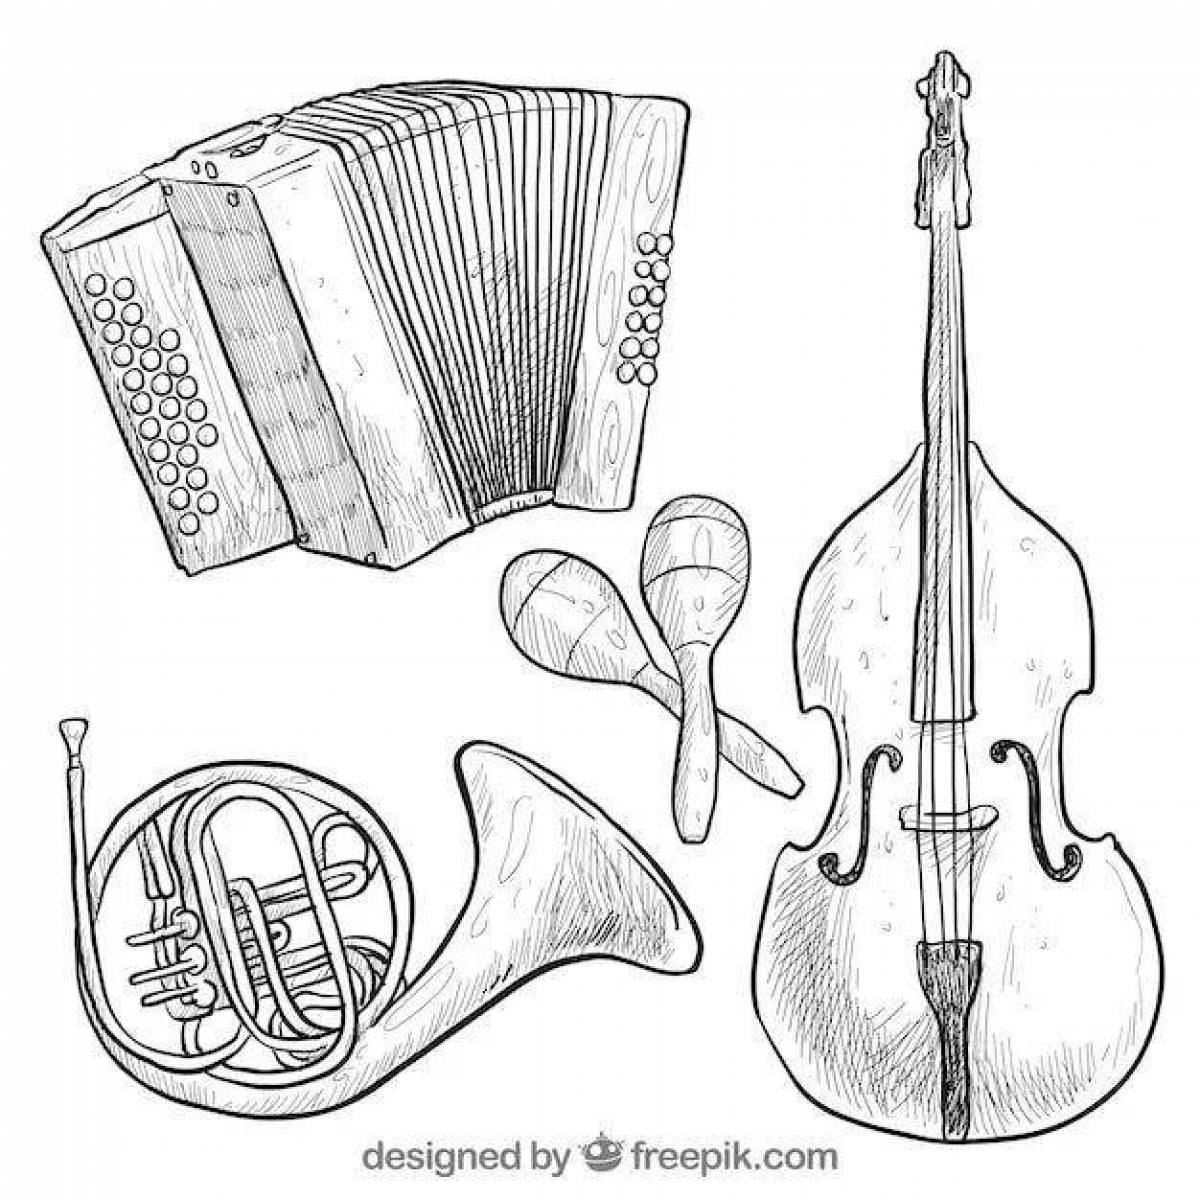 Delightful coloring of folk musical instruments